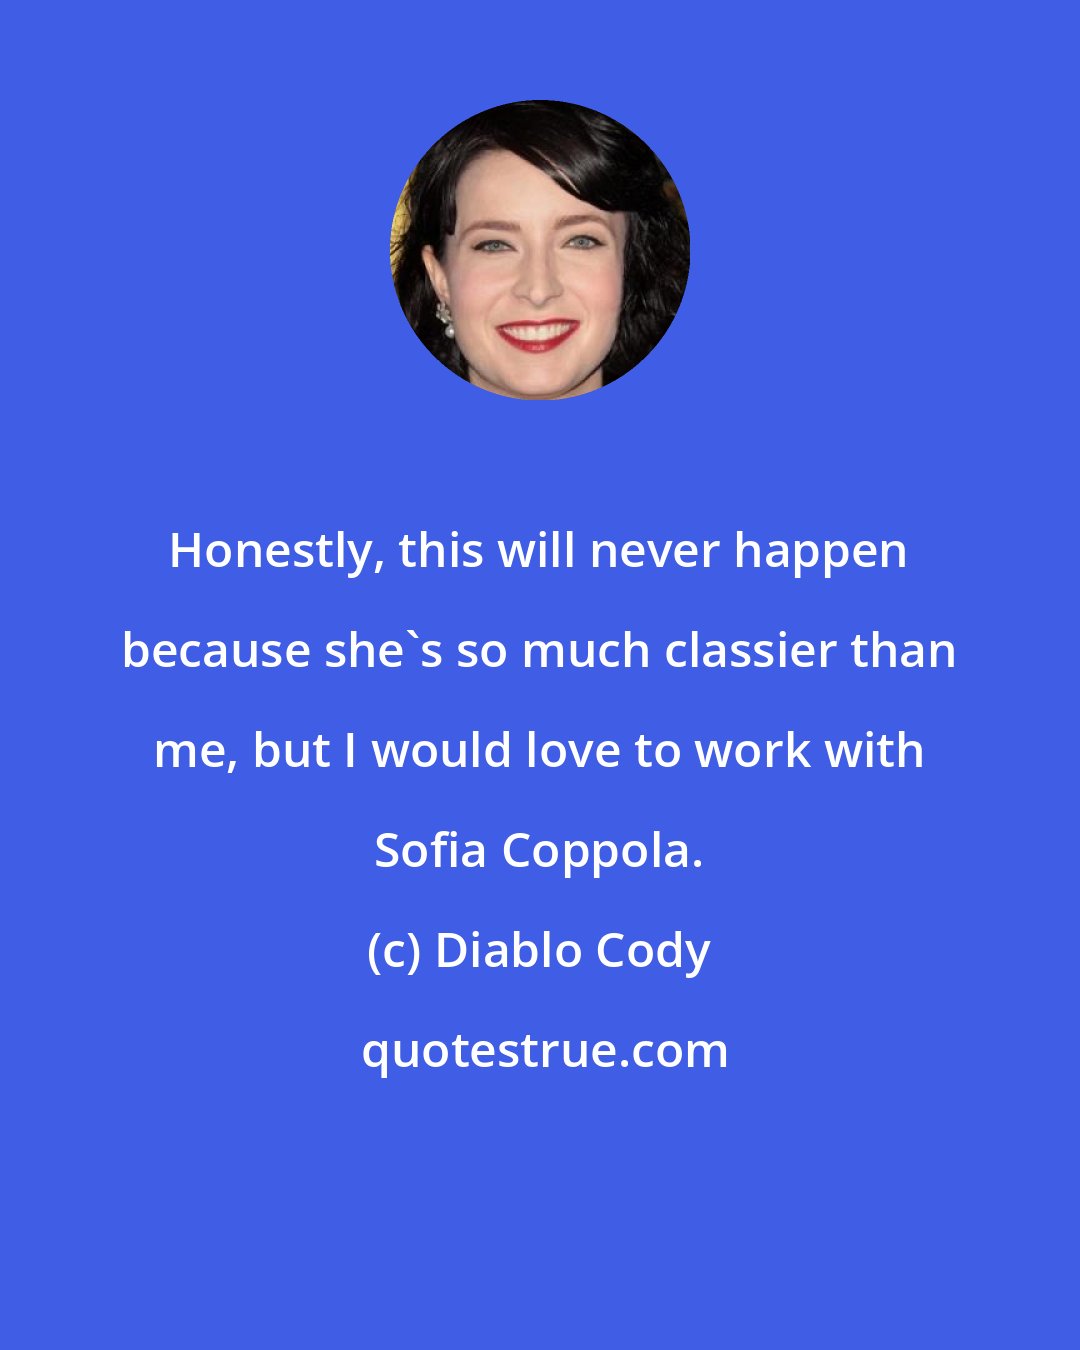 Diablo Cody: Honestly, this will never happen because she's so much classier than me, but I would love to work with Sofia Coppola.